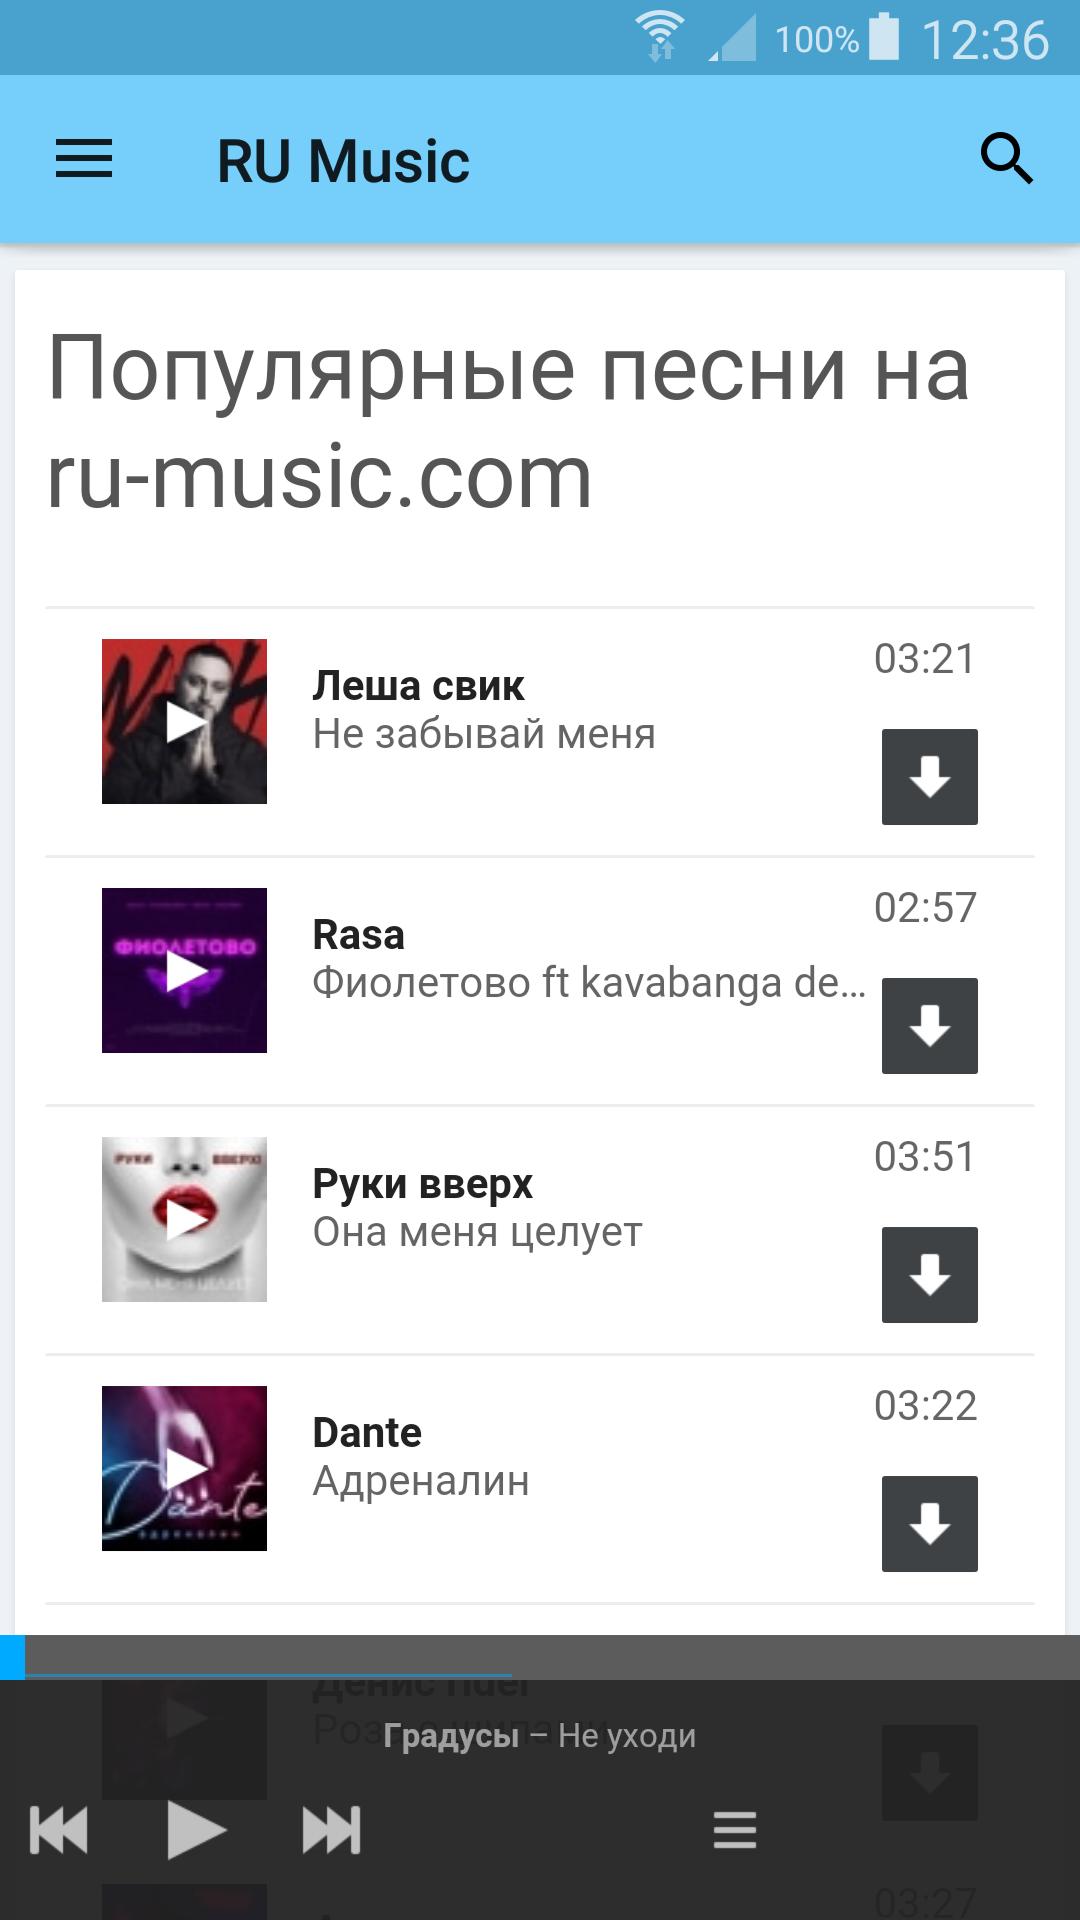 RU Music for Android - APK Download